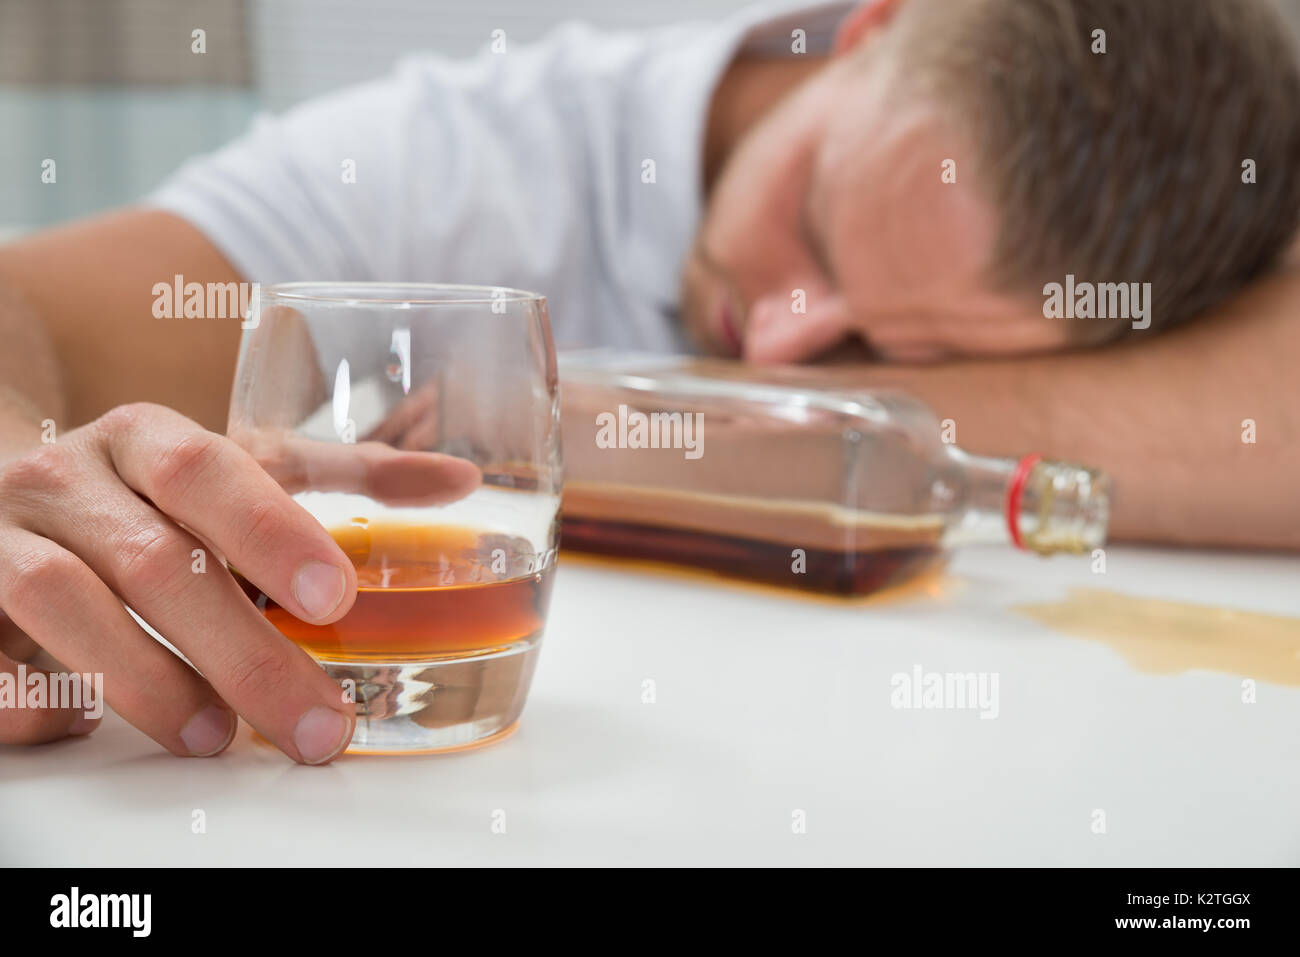 Young Drunk Man Sleeping On Table With A Glass Of Liquor Stock Photo